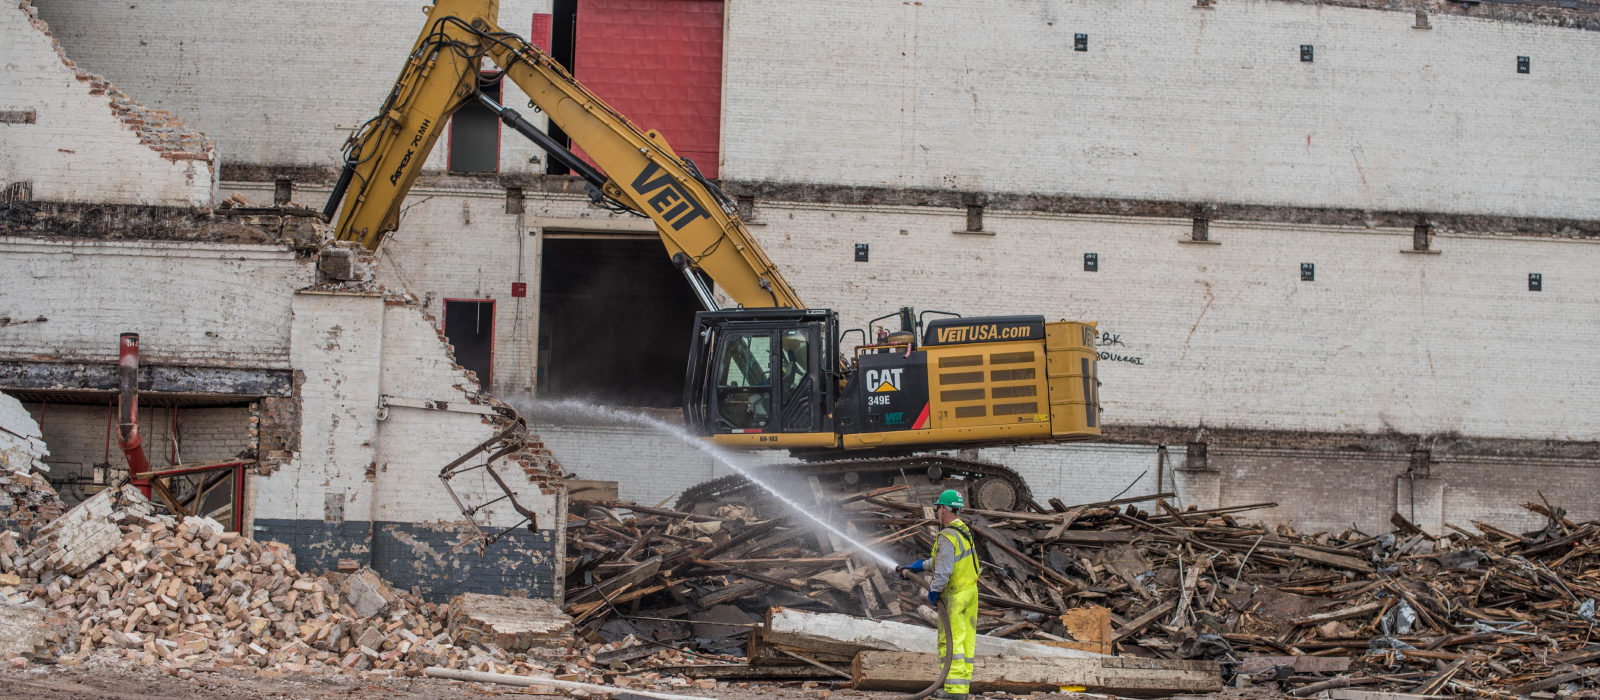 Our Crew On Excavator Destroying Water Street Building